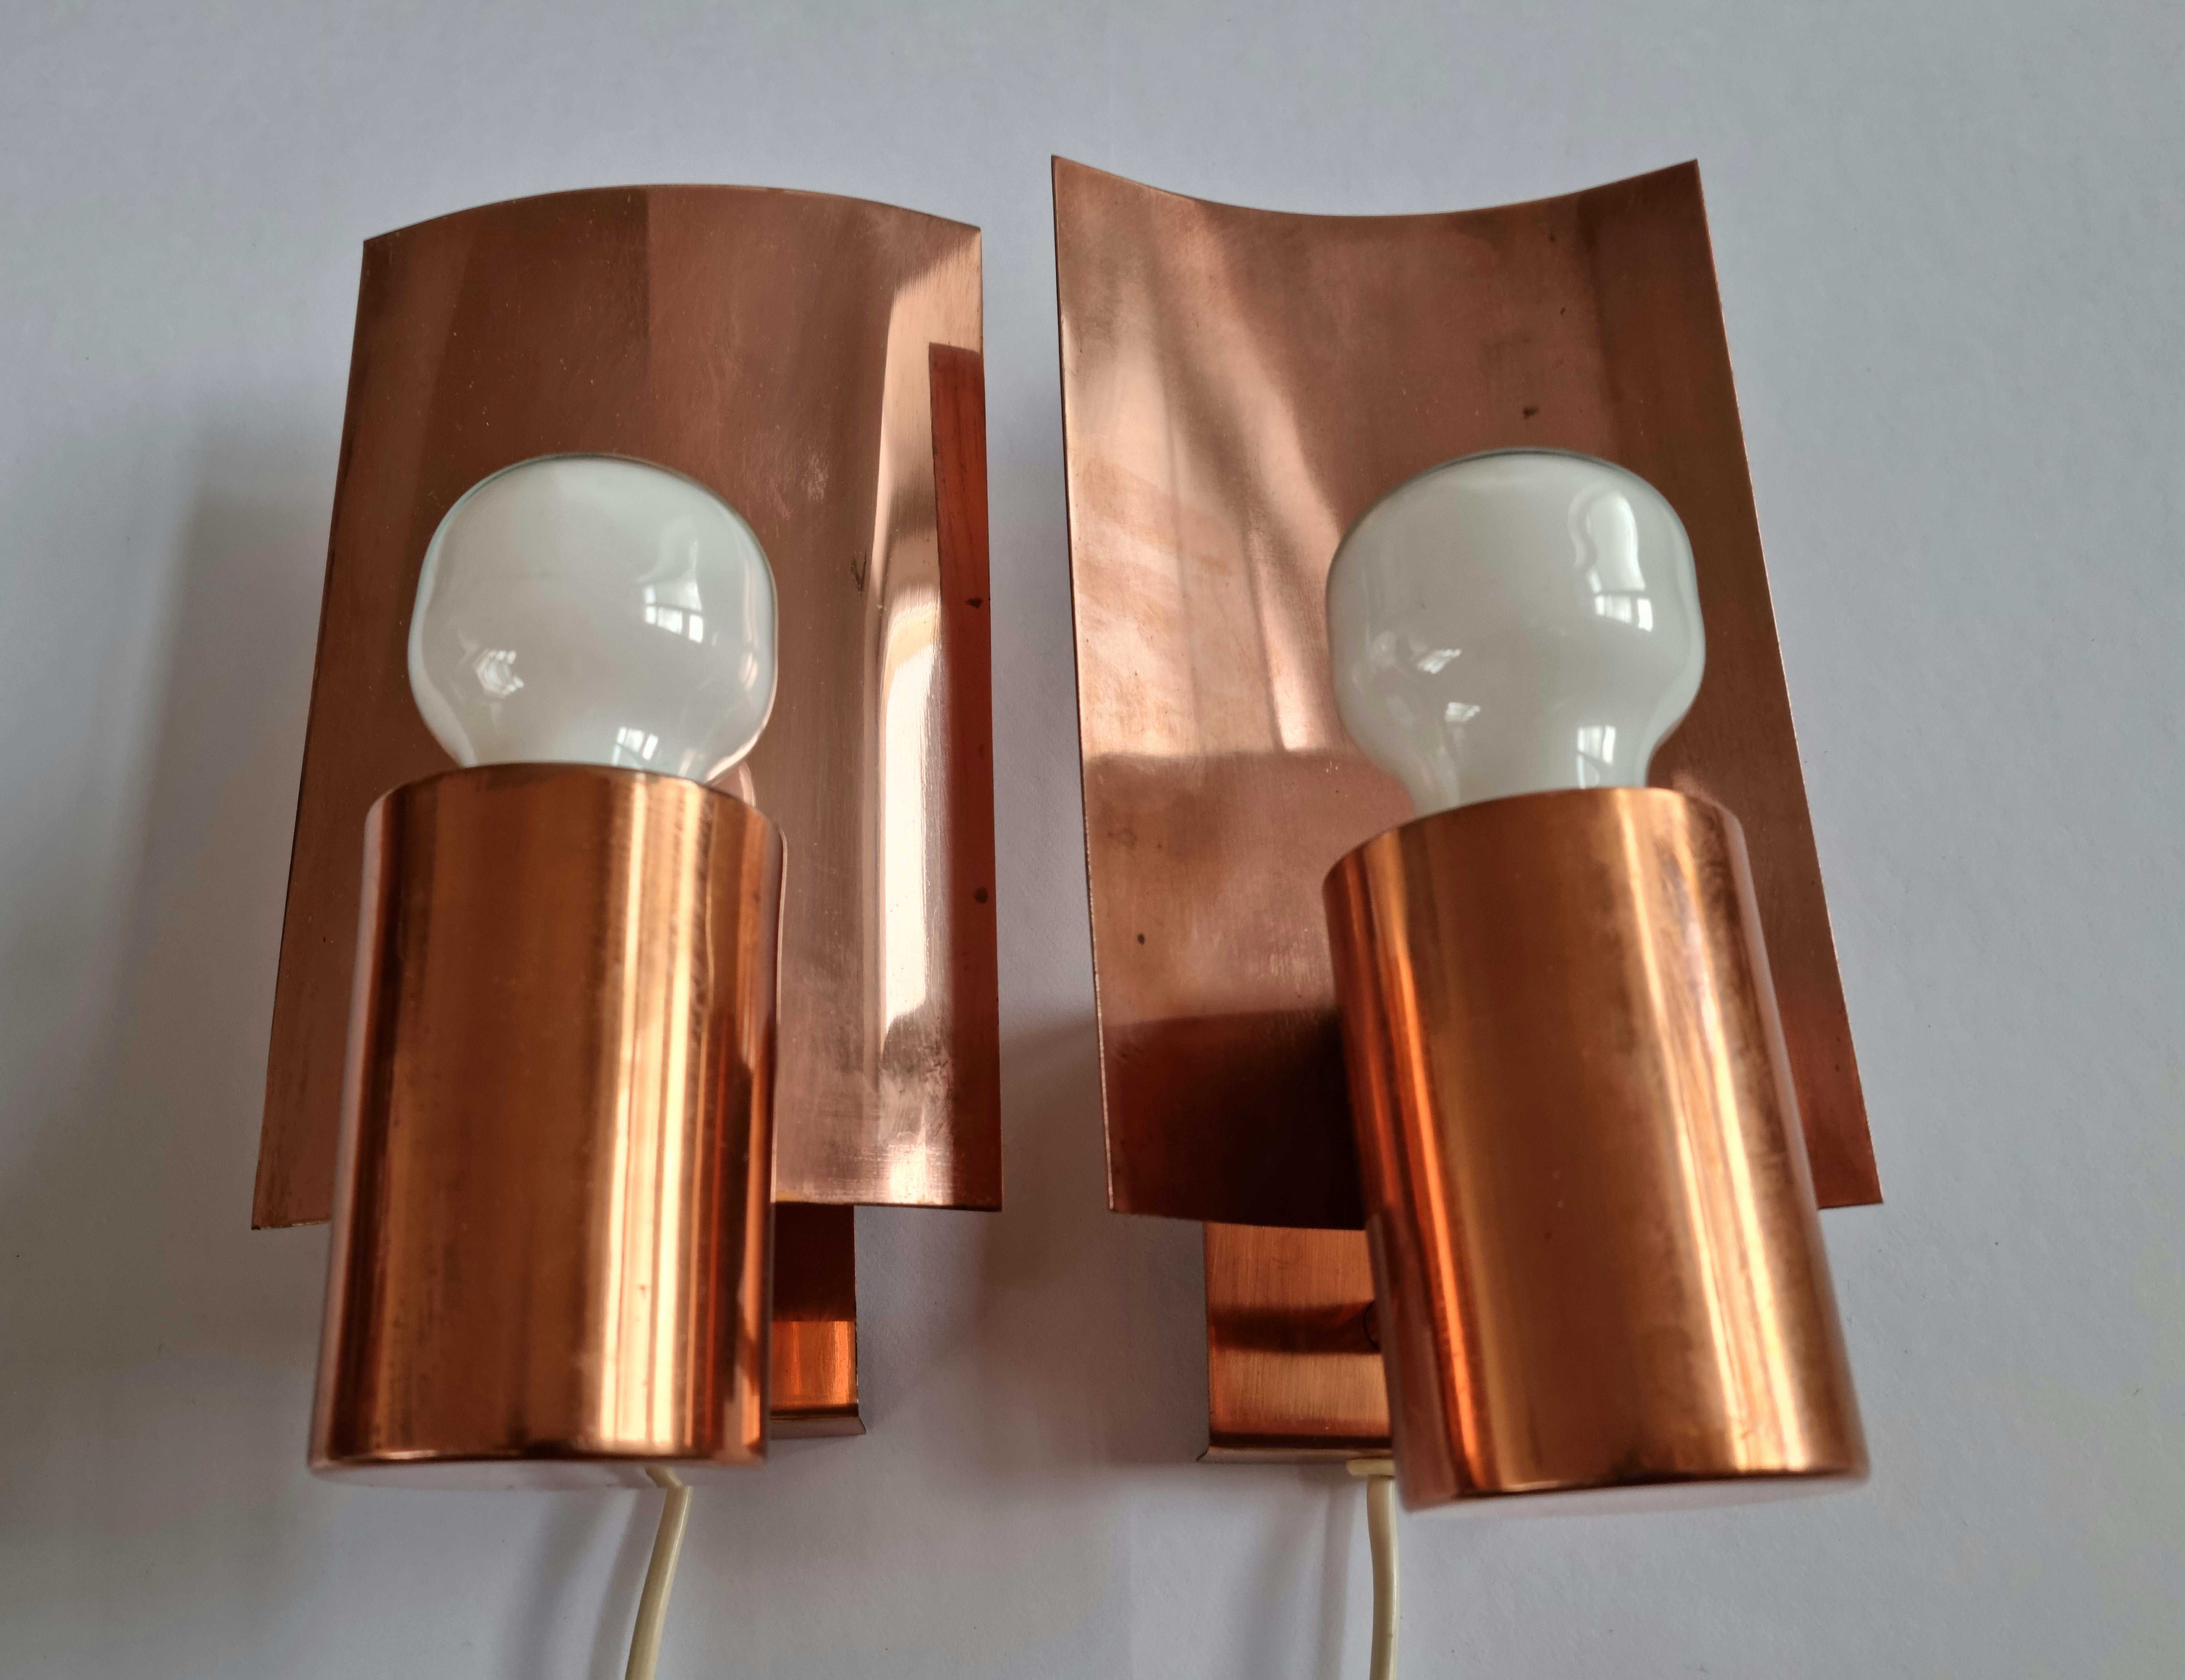 Pair of Midcentury Copper Wall Lamps, Denmark, 1960s For Sale 5